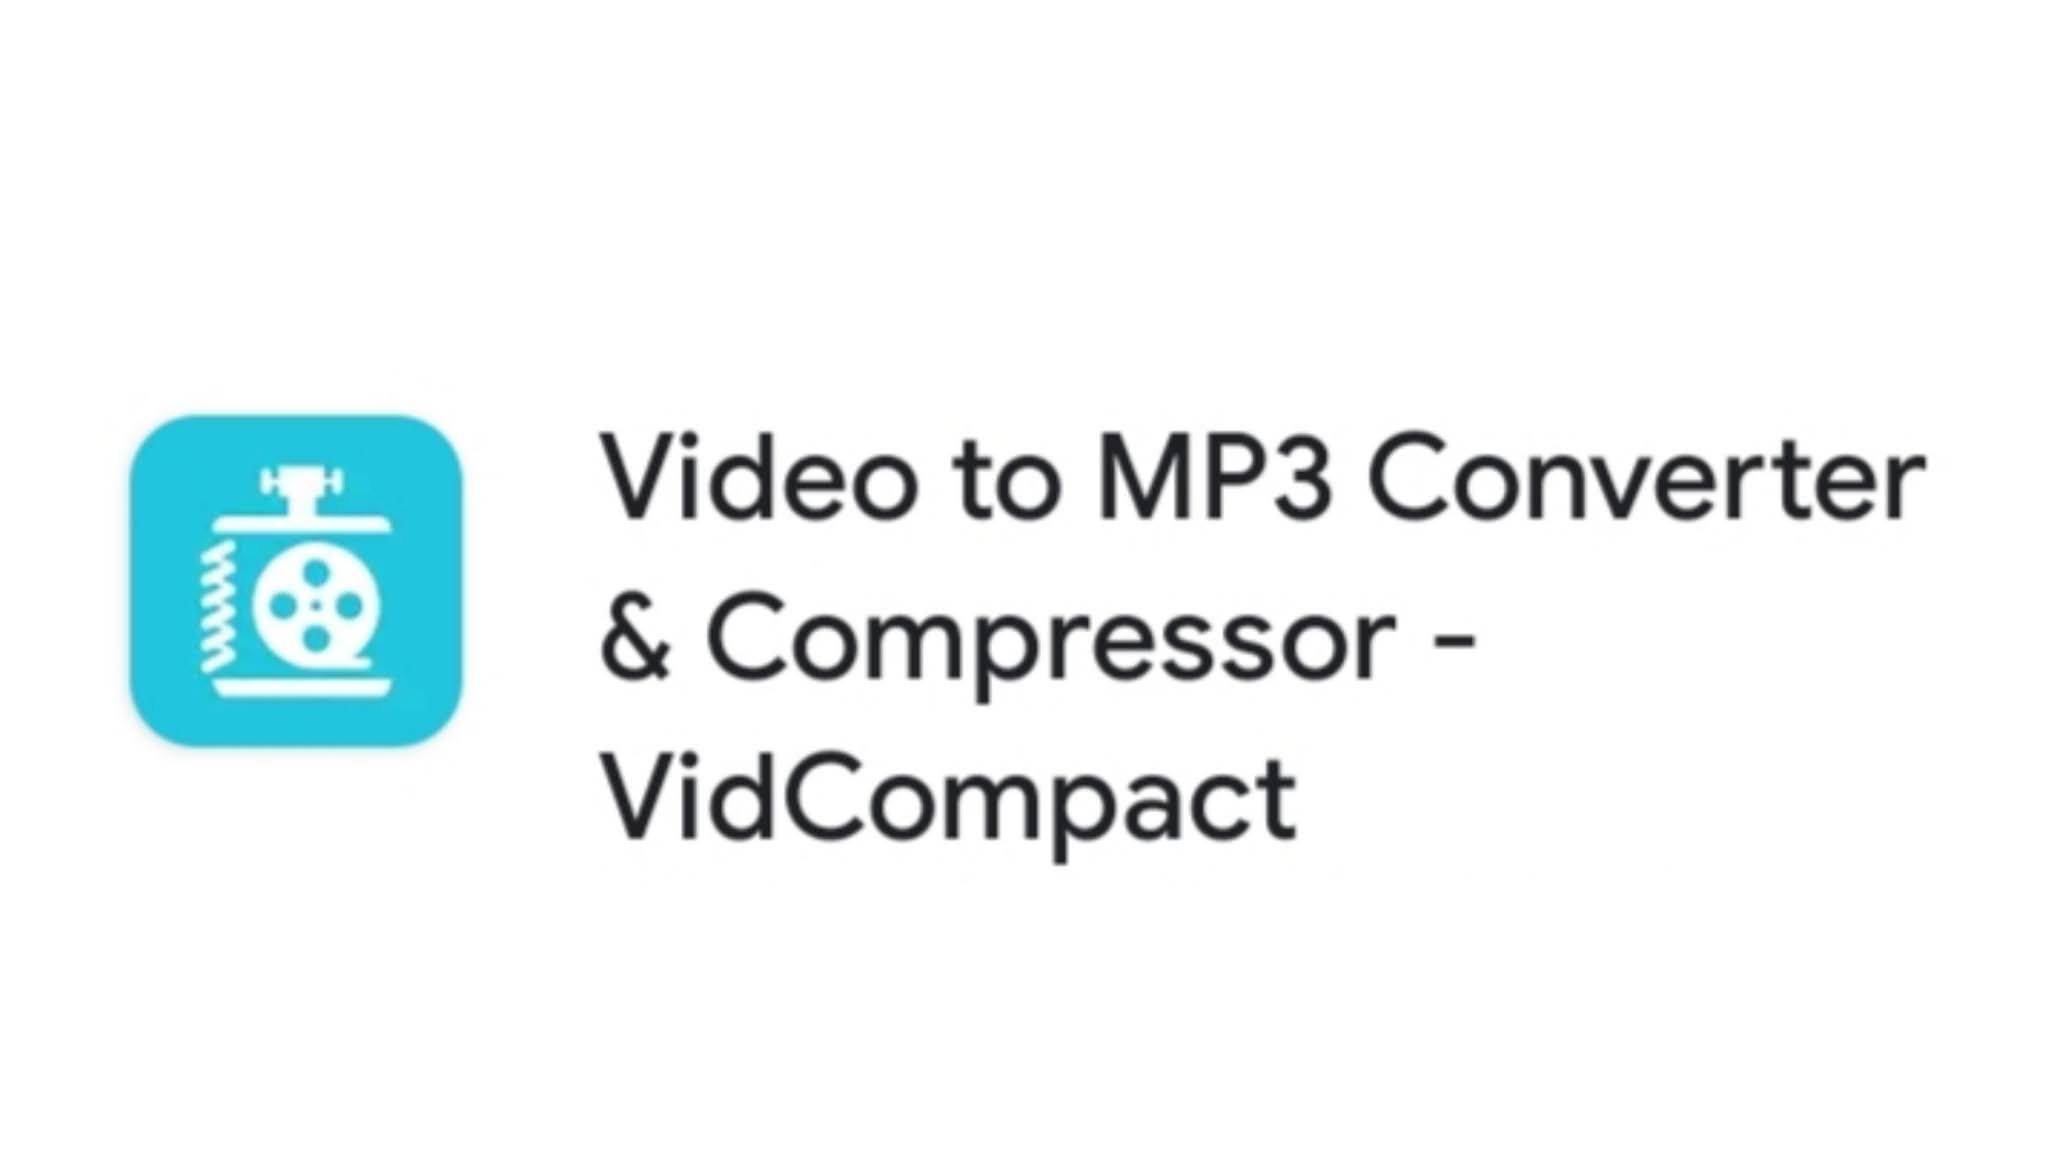 video downloader and mp3 converter pro